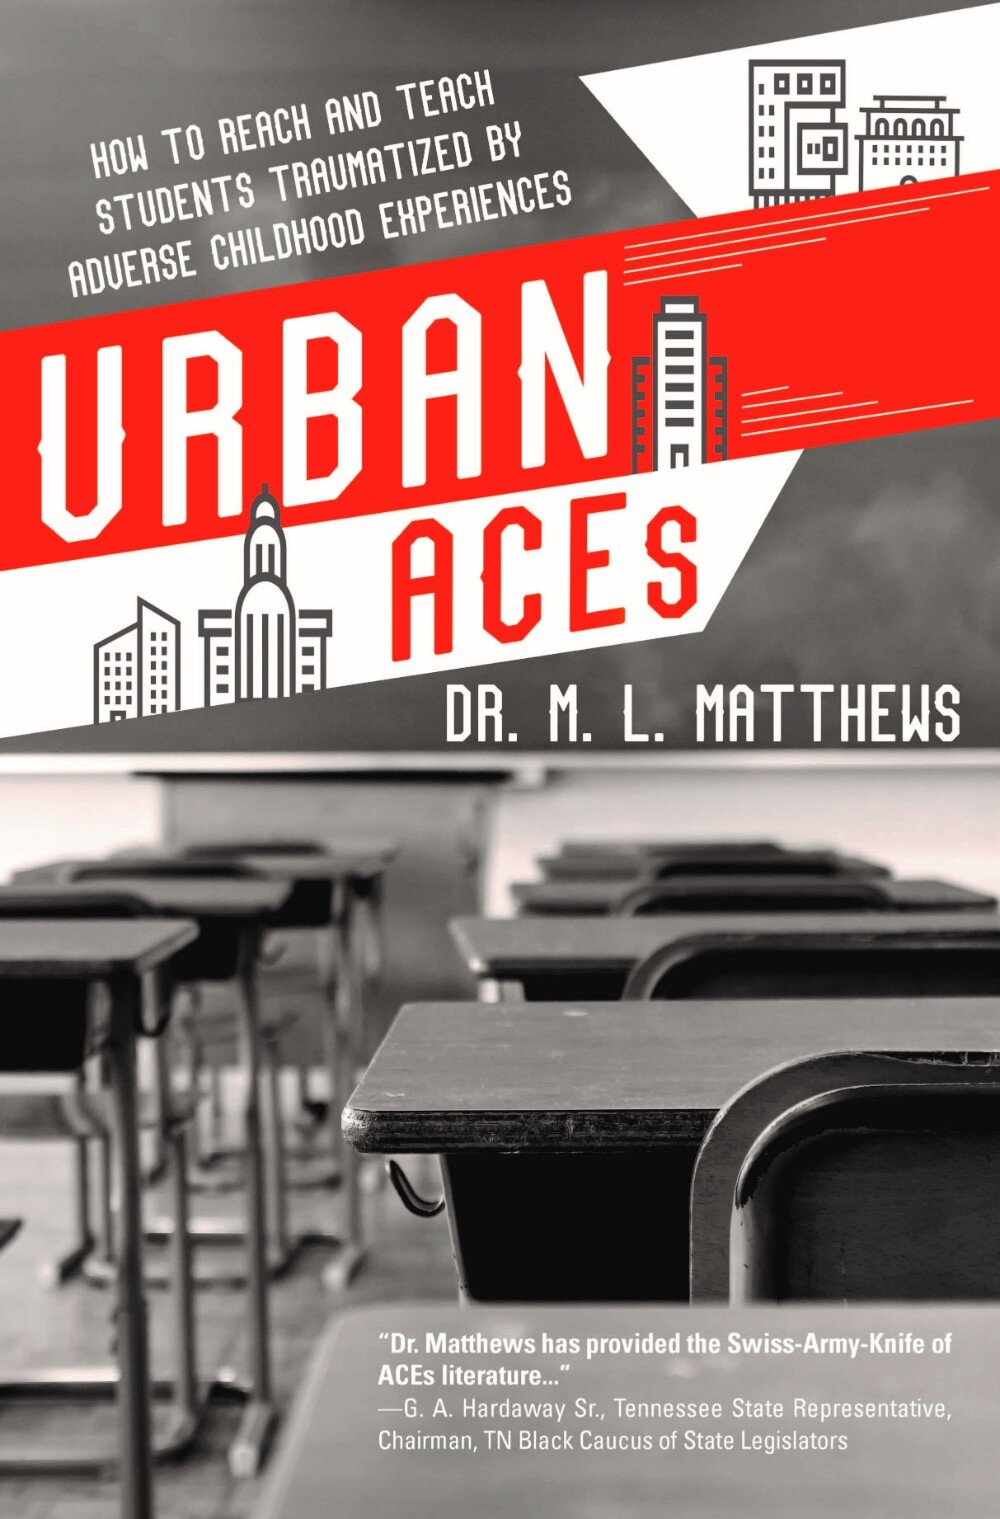 Dr. Marcus Matthews' latest book (pictured) was released in December 2019. (Submitted)